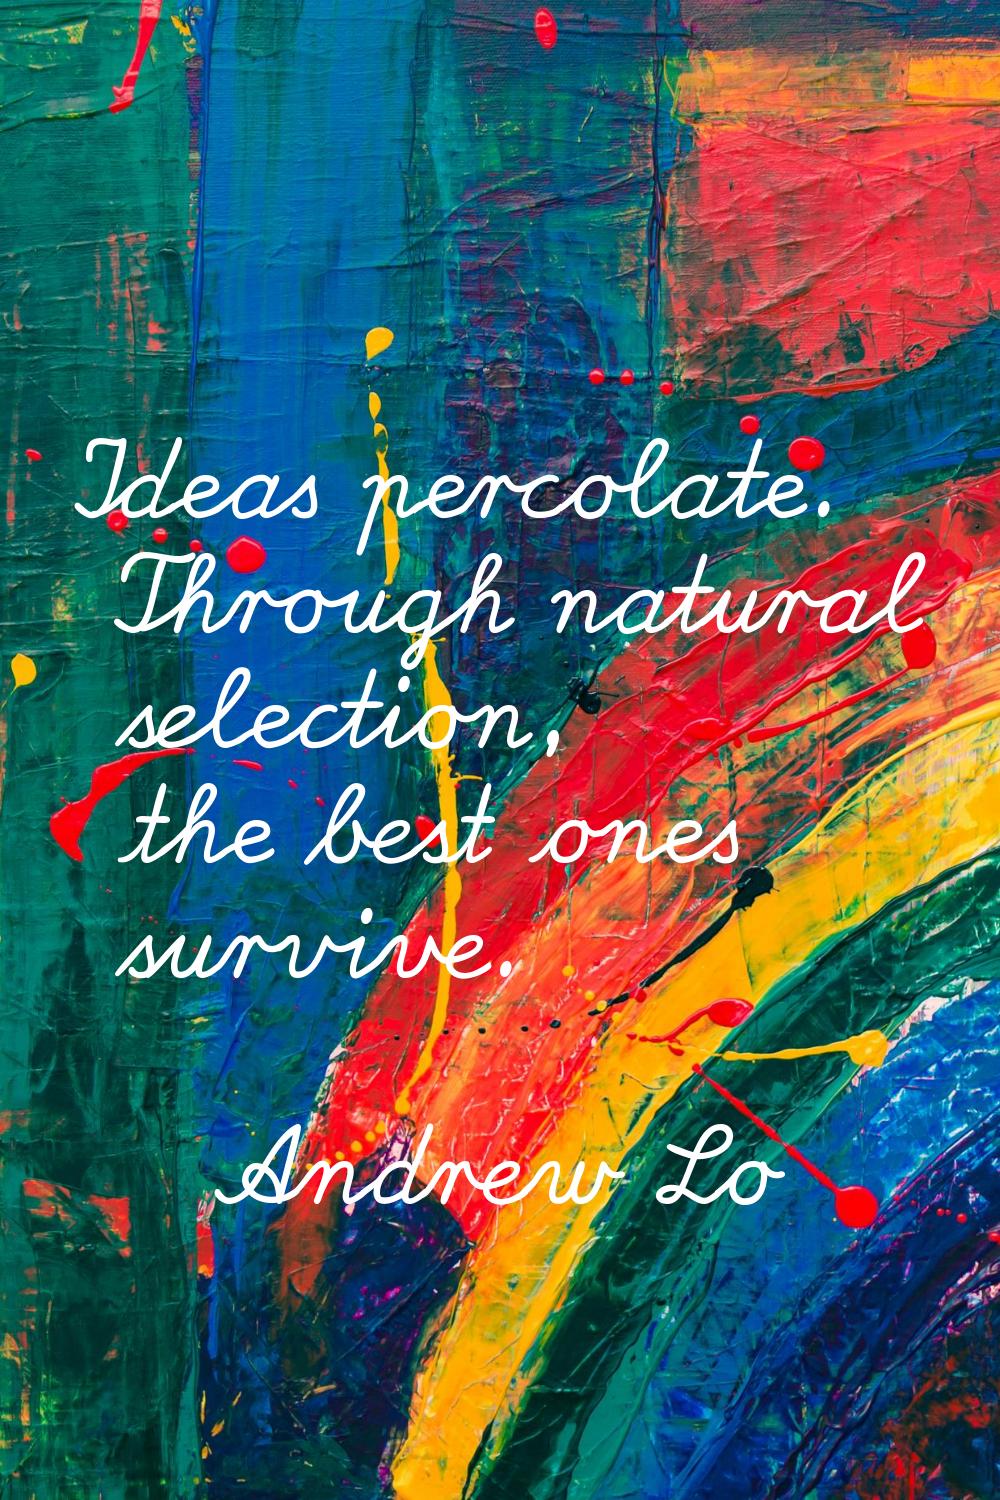 Ideas percolate. Through natural selection, the best ones survive.